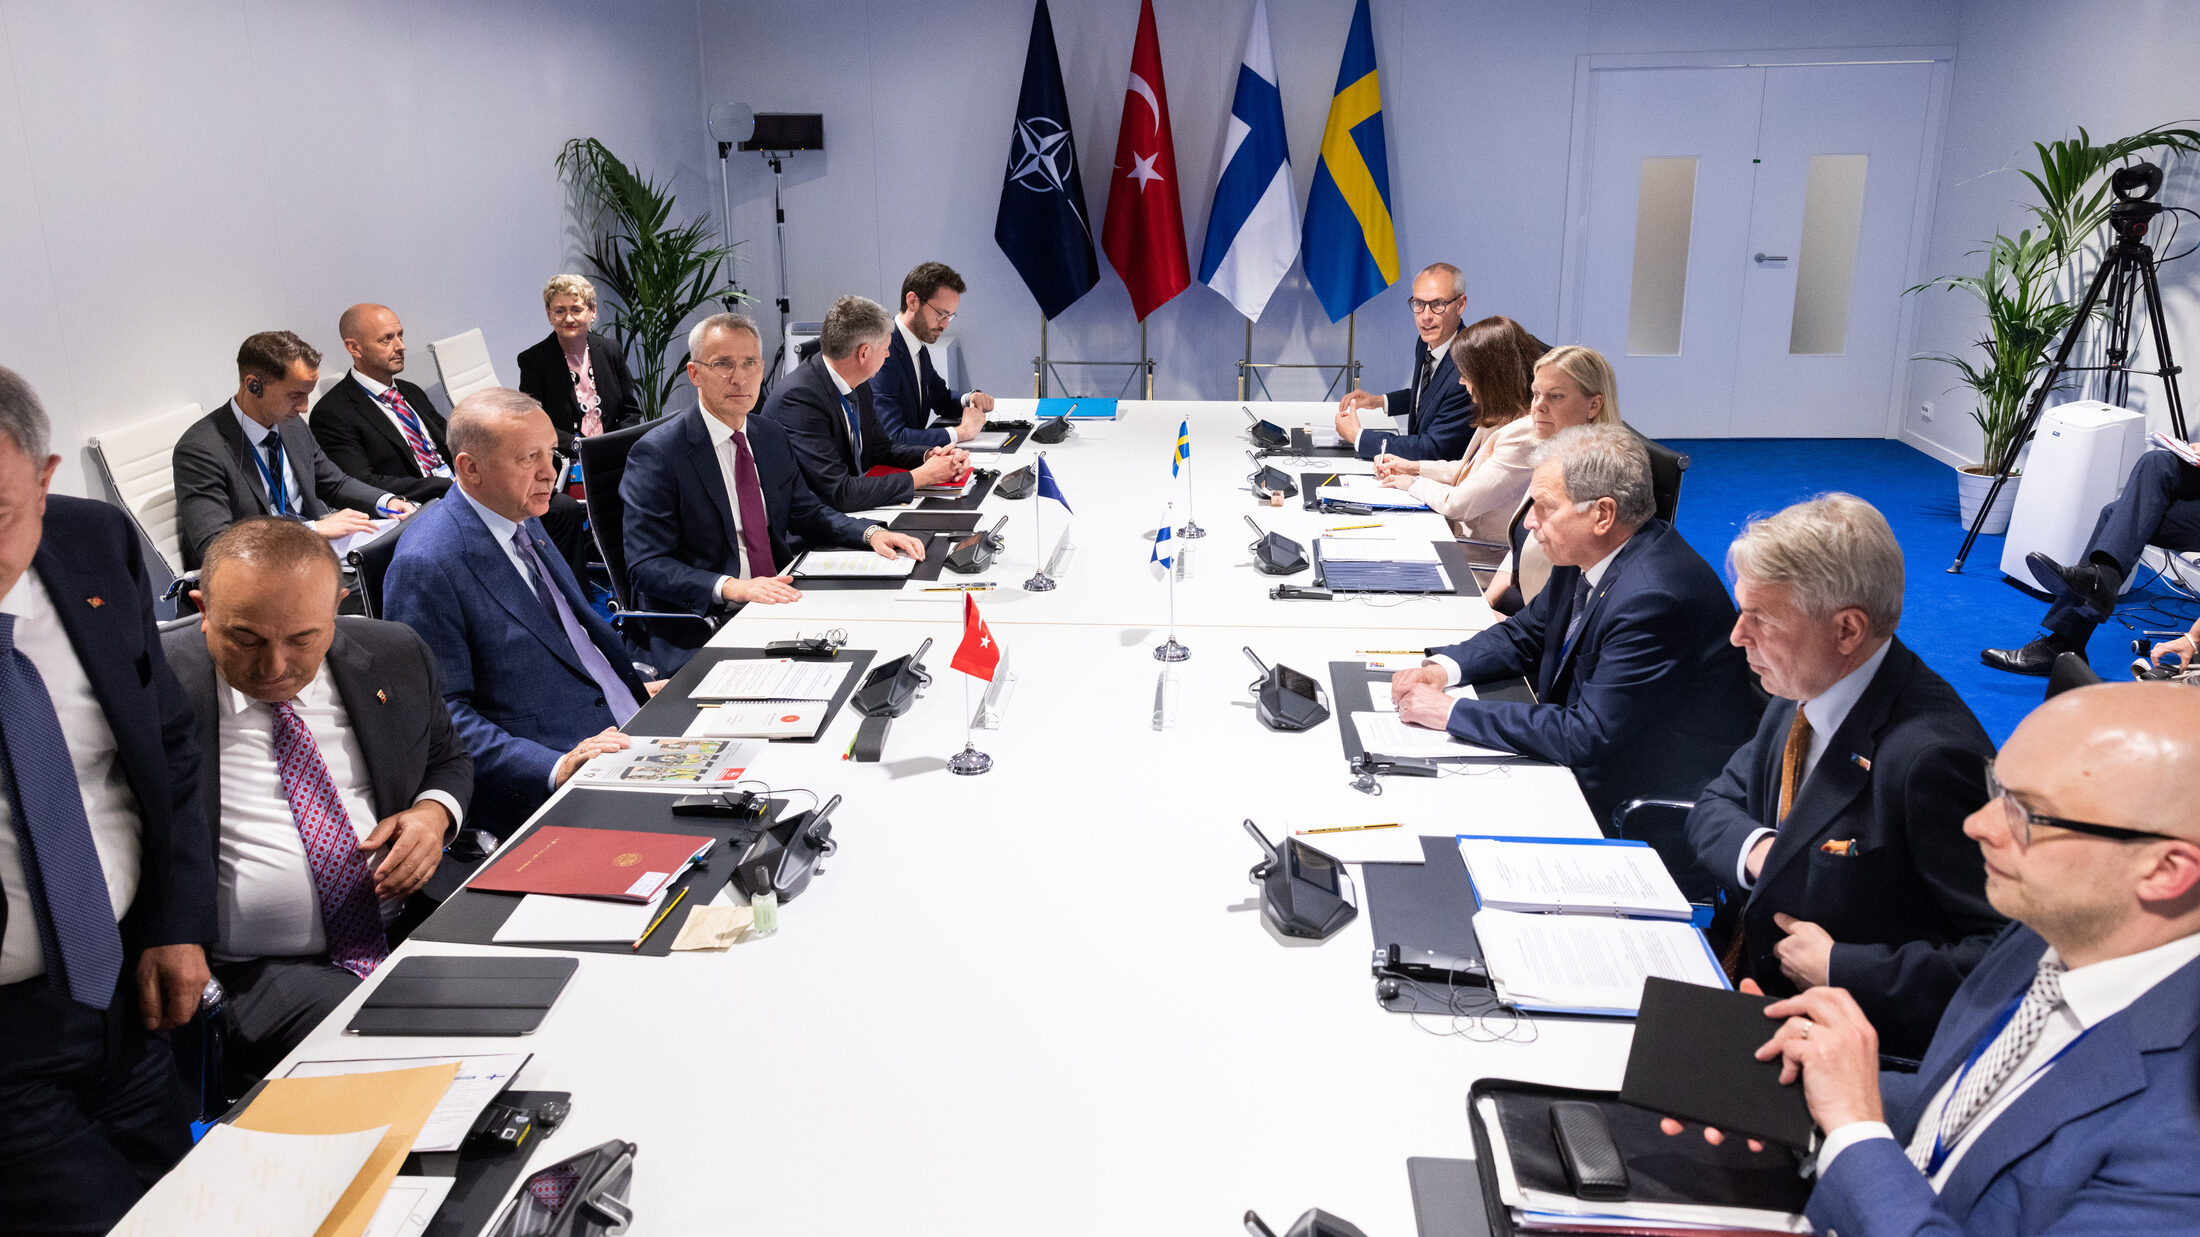 Sweden’s NATO membership hangs in the balance with Turkey’s election